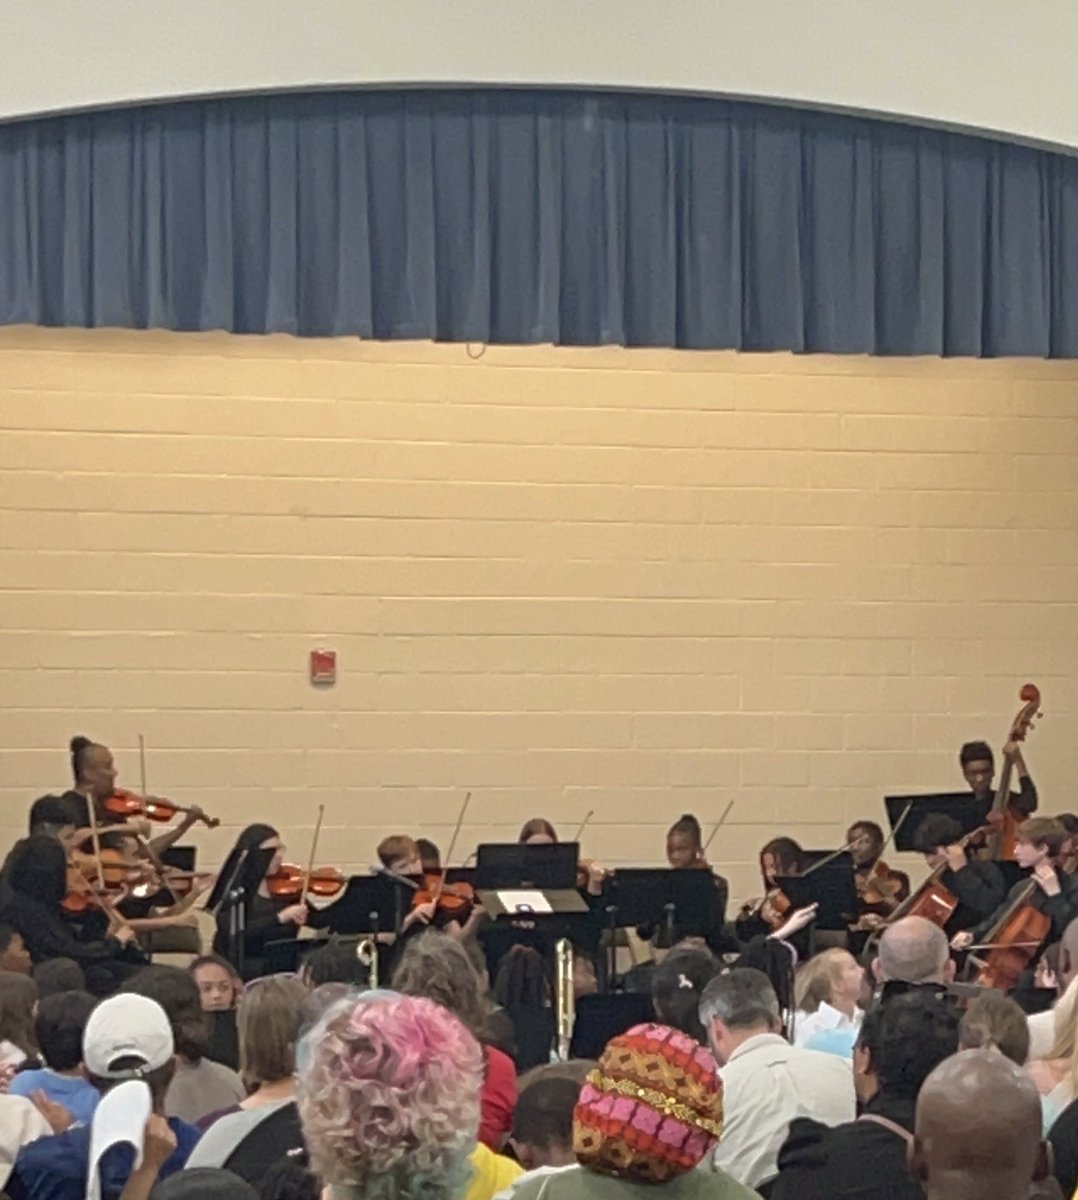 What a fantastic concert celebrating 🎶#MIOSM! ❤️🥳 Congratulations to all the dynamic performers from our awesome APS schools…@APSBenteen @BurgessPeterson @APSHumphriesES @ToomerES @APSMLK 🎊 A job well done @kmurray_apsband!! 👍🏽 You are amazing! 🤩